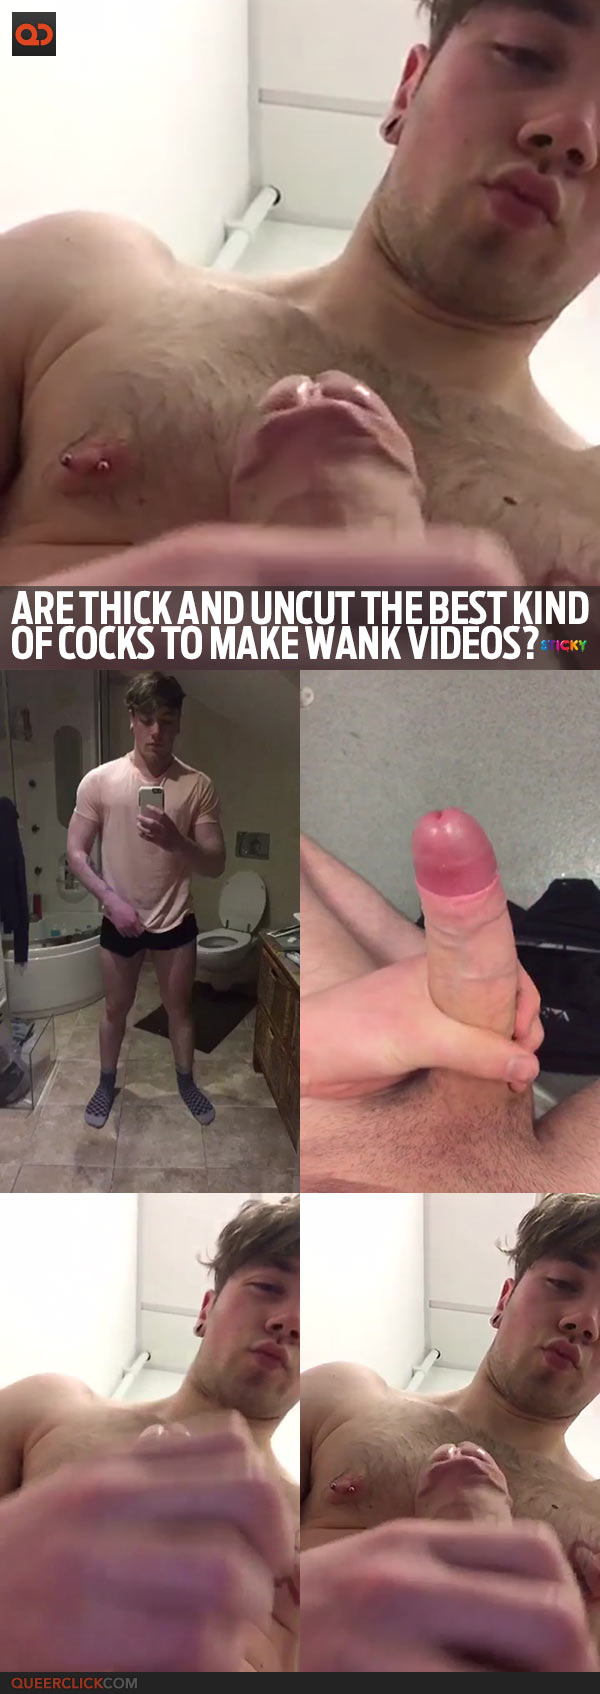 qc-sticky-thick_and_uncut-teaser